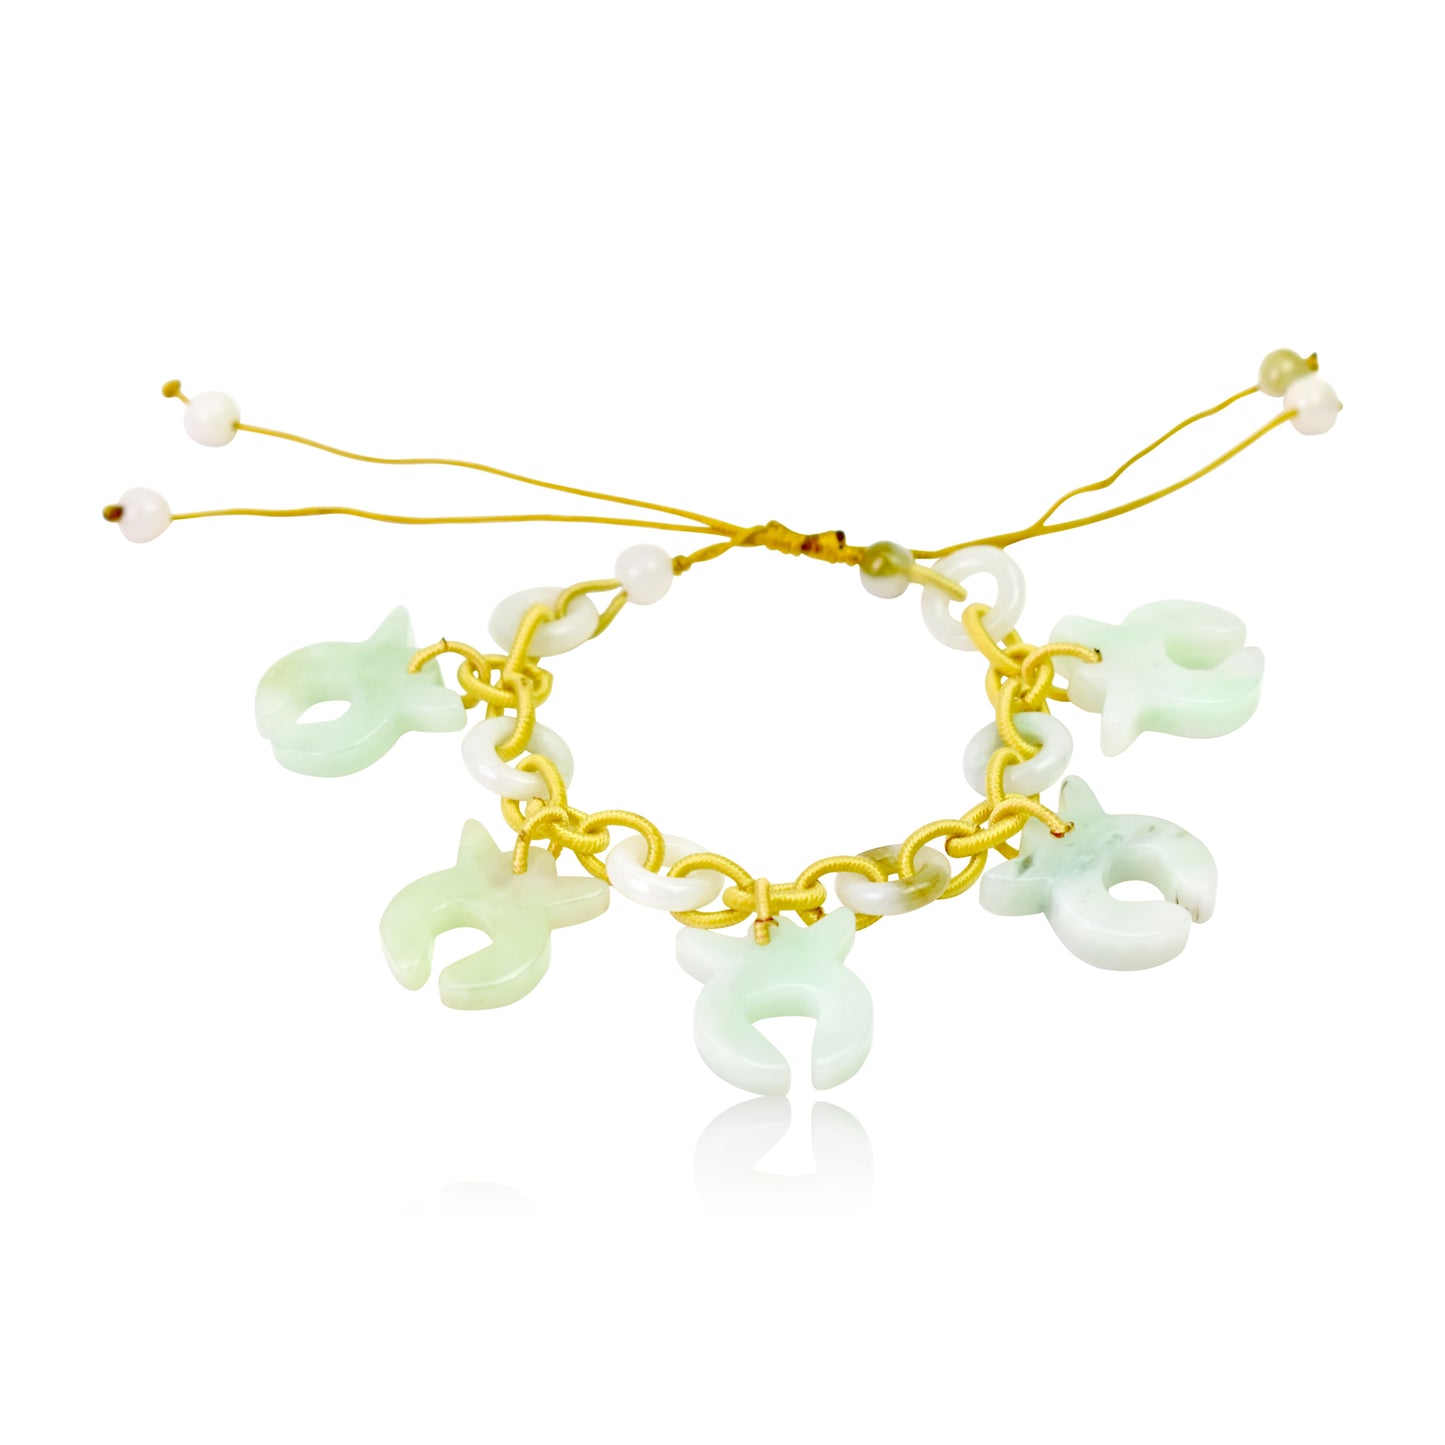 Be Stable and Reliable with a Taurus Astrology Jade Bracelet made with Yellow Cord